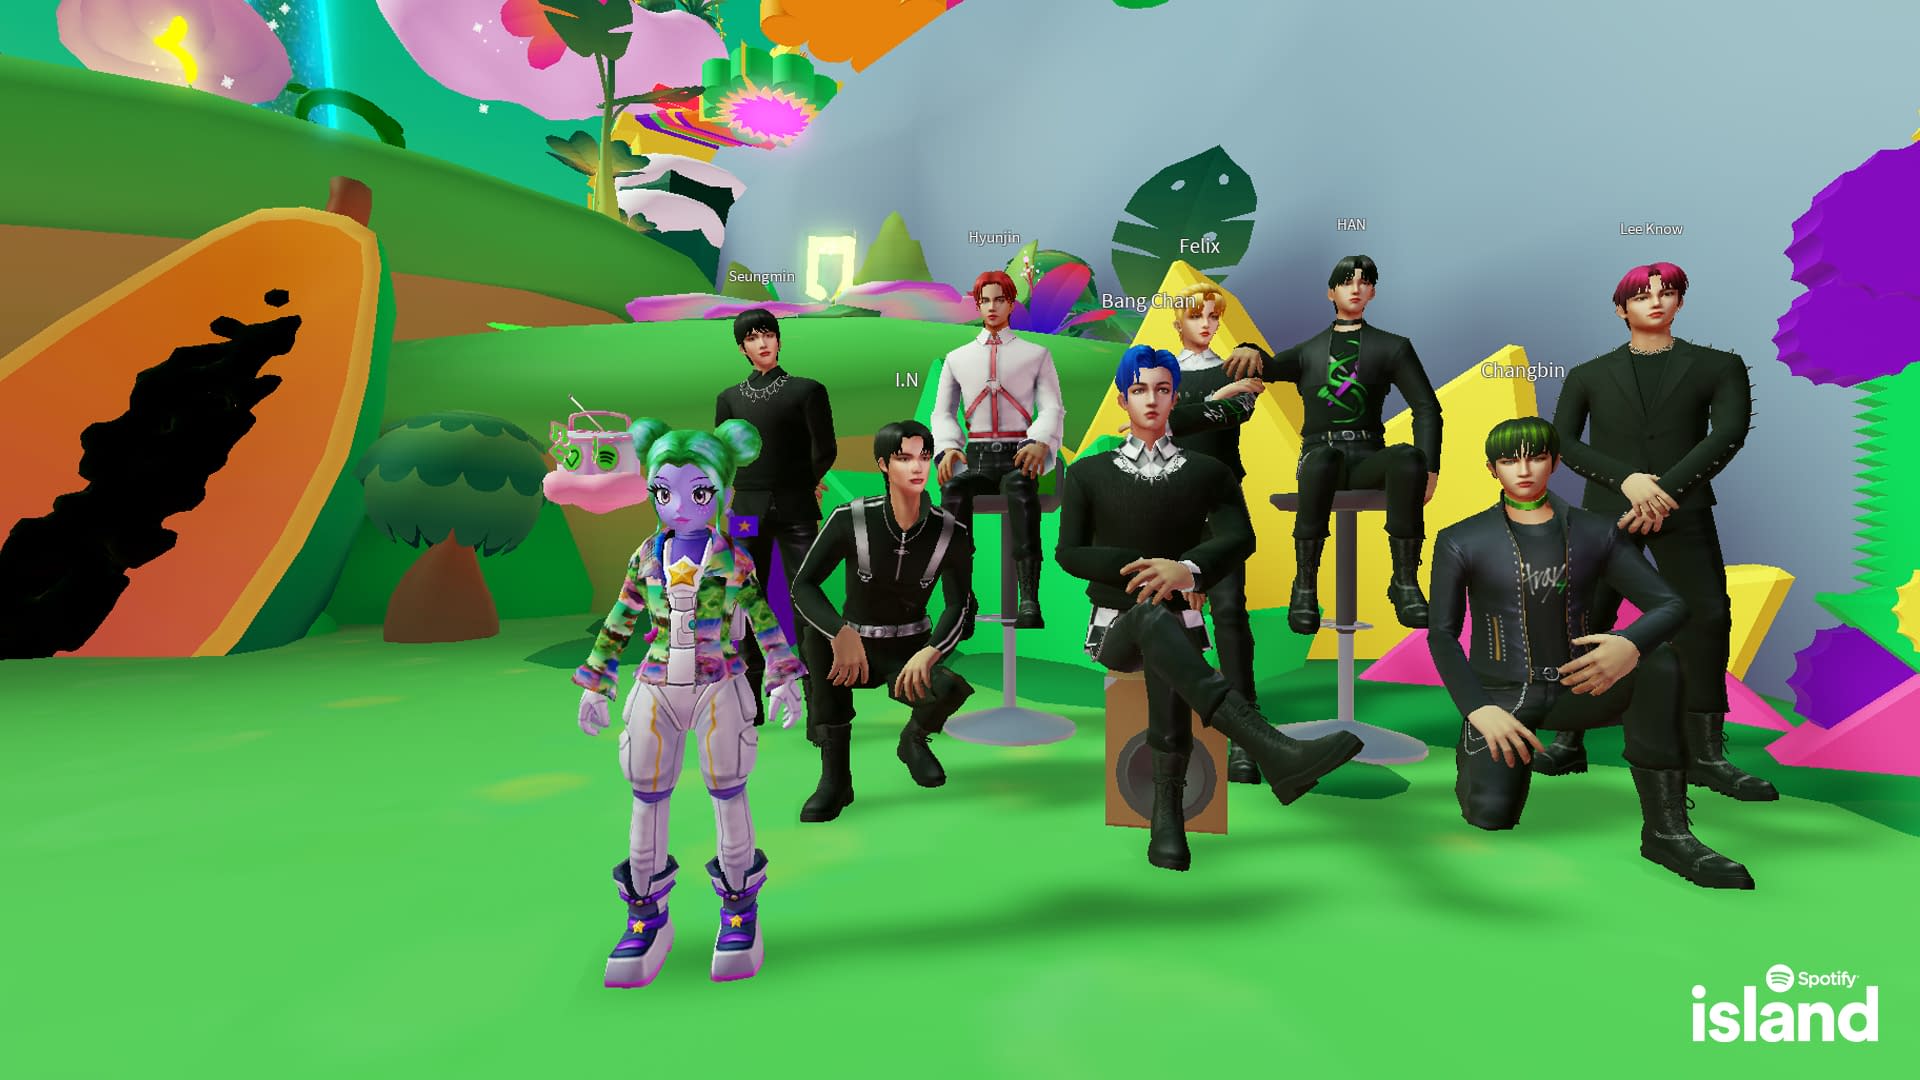 Spotify's Roblox island gets an extension devoted to K-Pop - Music Ally